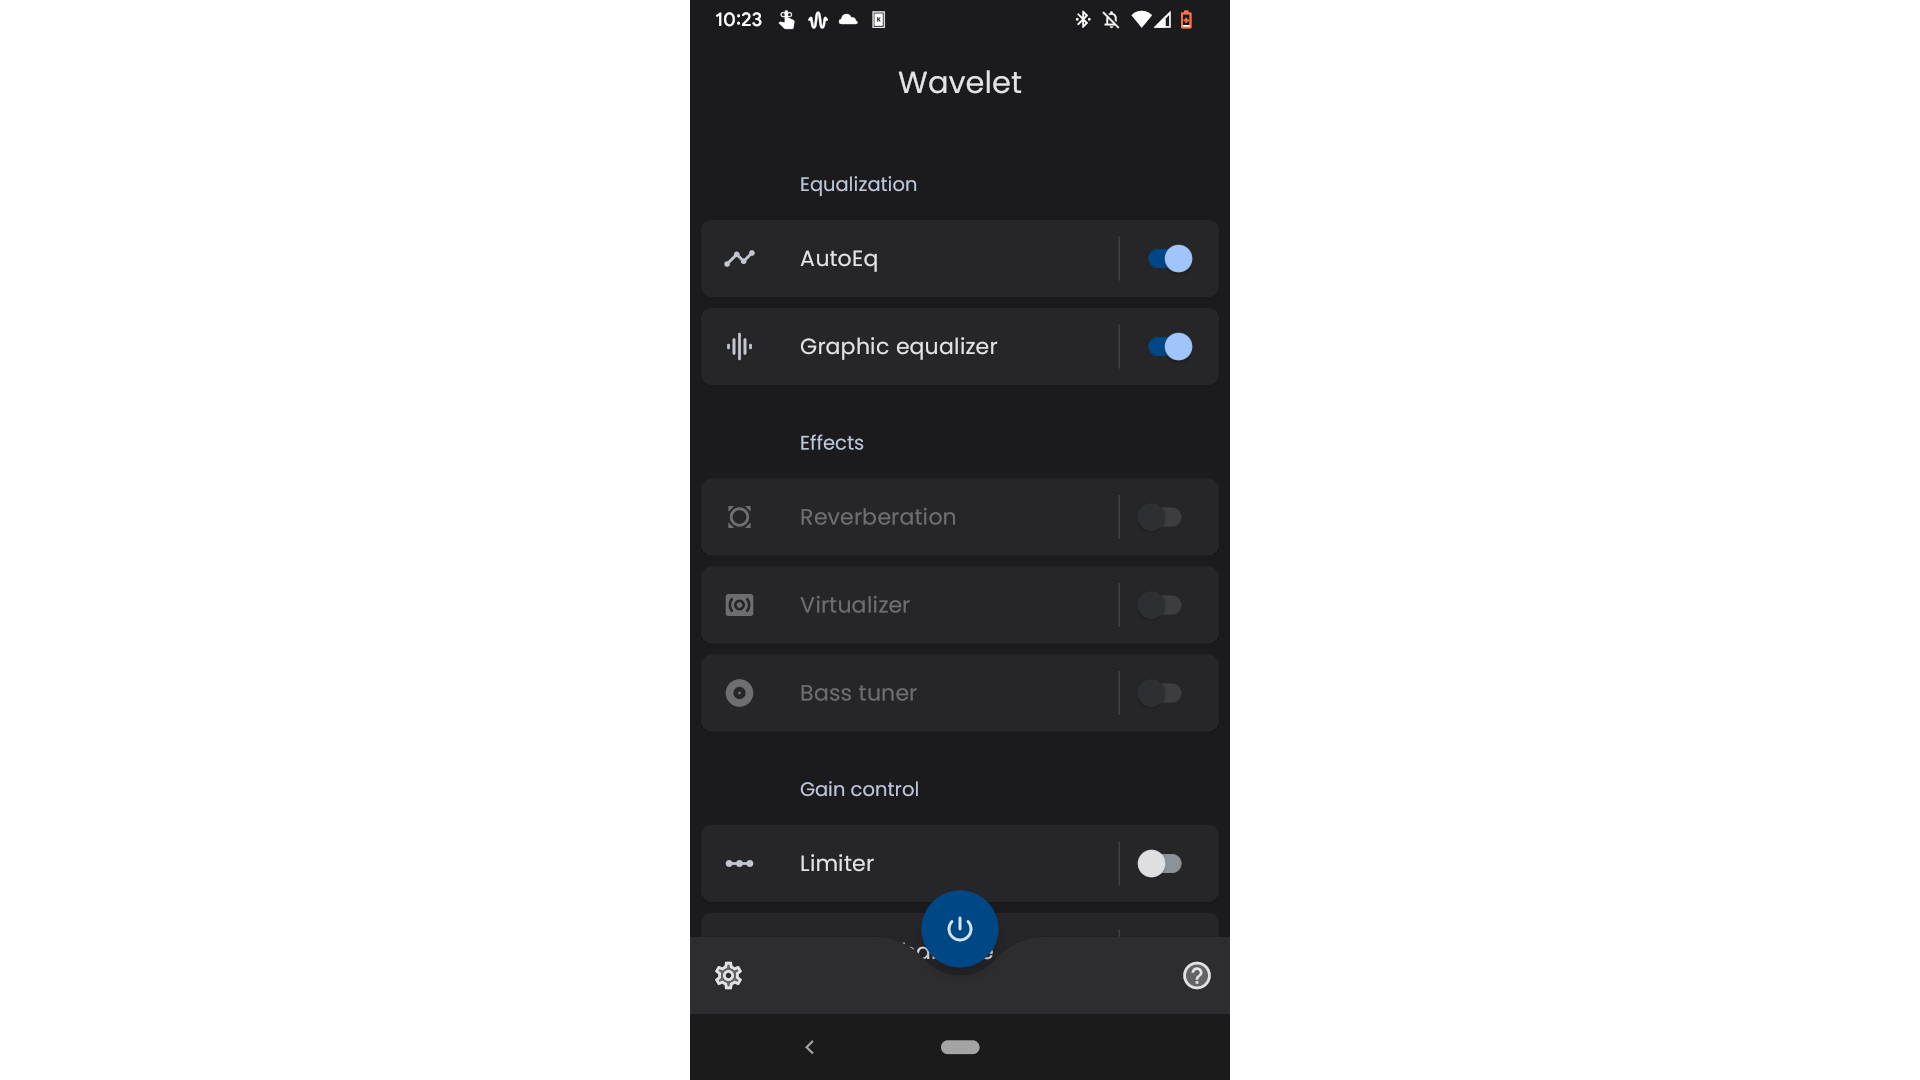 A screenshot of the Wavelet app showing the main screen and the various functions available, indicating that some are disabled due to this being a trial version of the app by greying out those options.